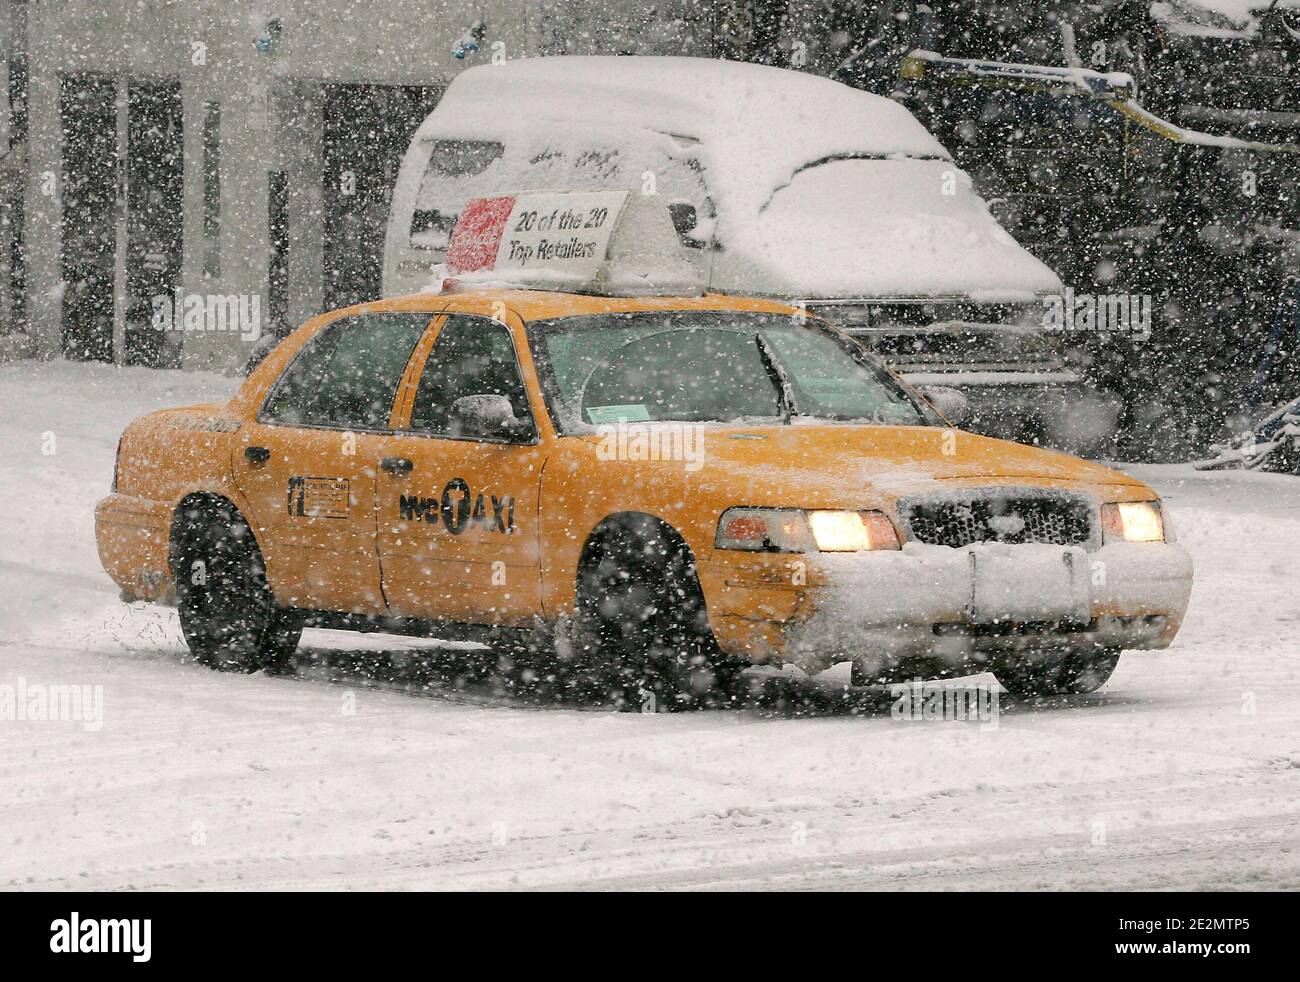 A yellow cab under the snow during a blizzard in Soho, New York, NY on February 10, 2010. Photo by Charles Guerin/ABACAPRESS.COM Stock Photo